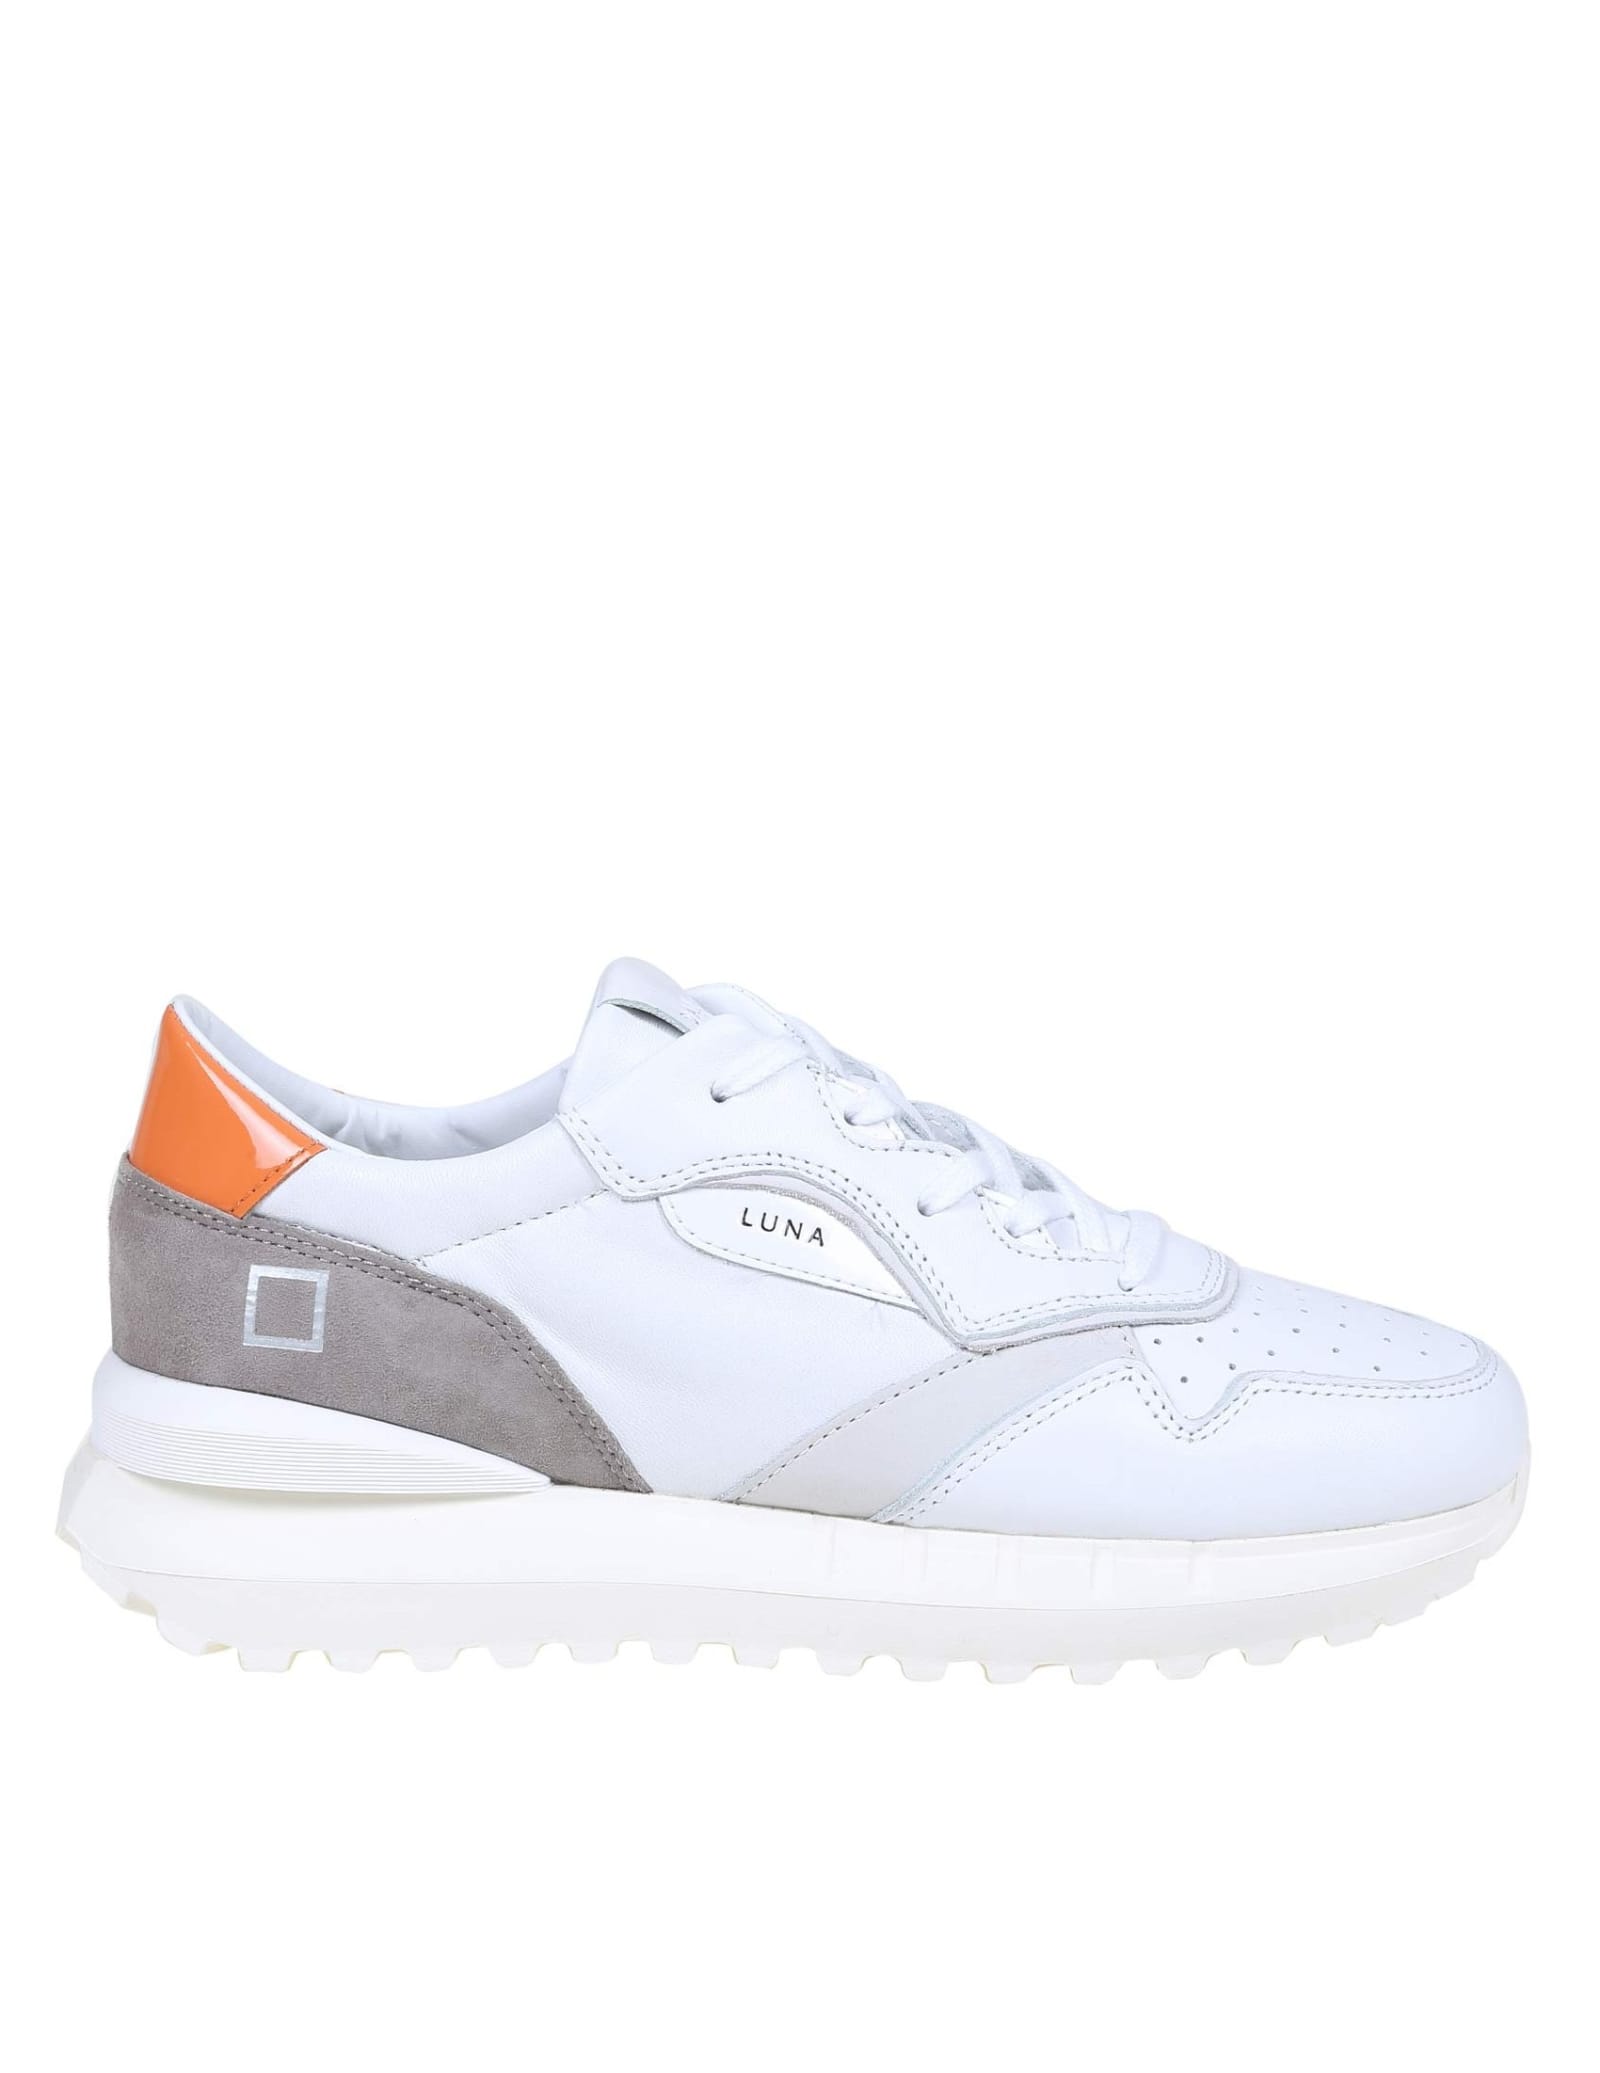 D.A.T.E. At Your Place. White And Orange Leather Sneakers